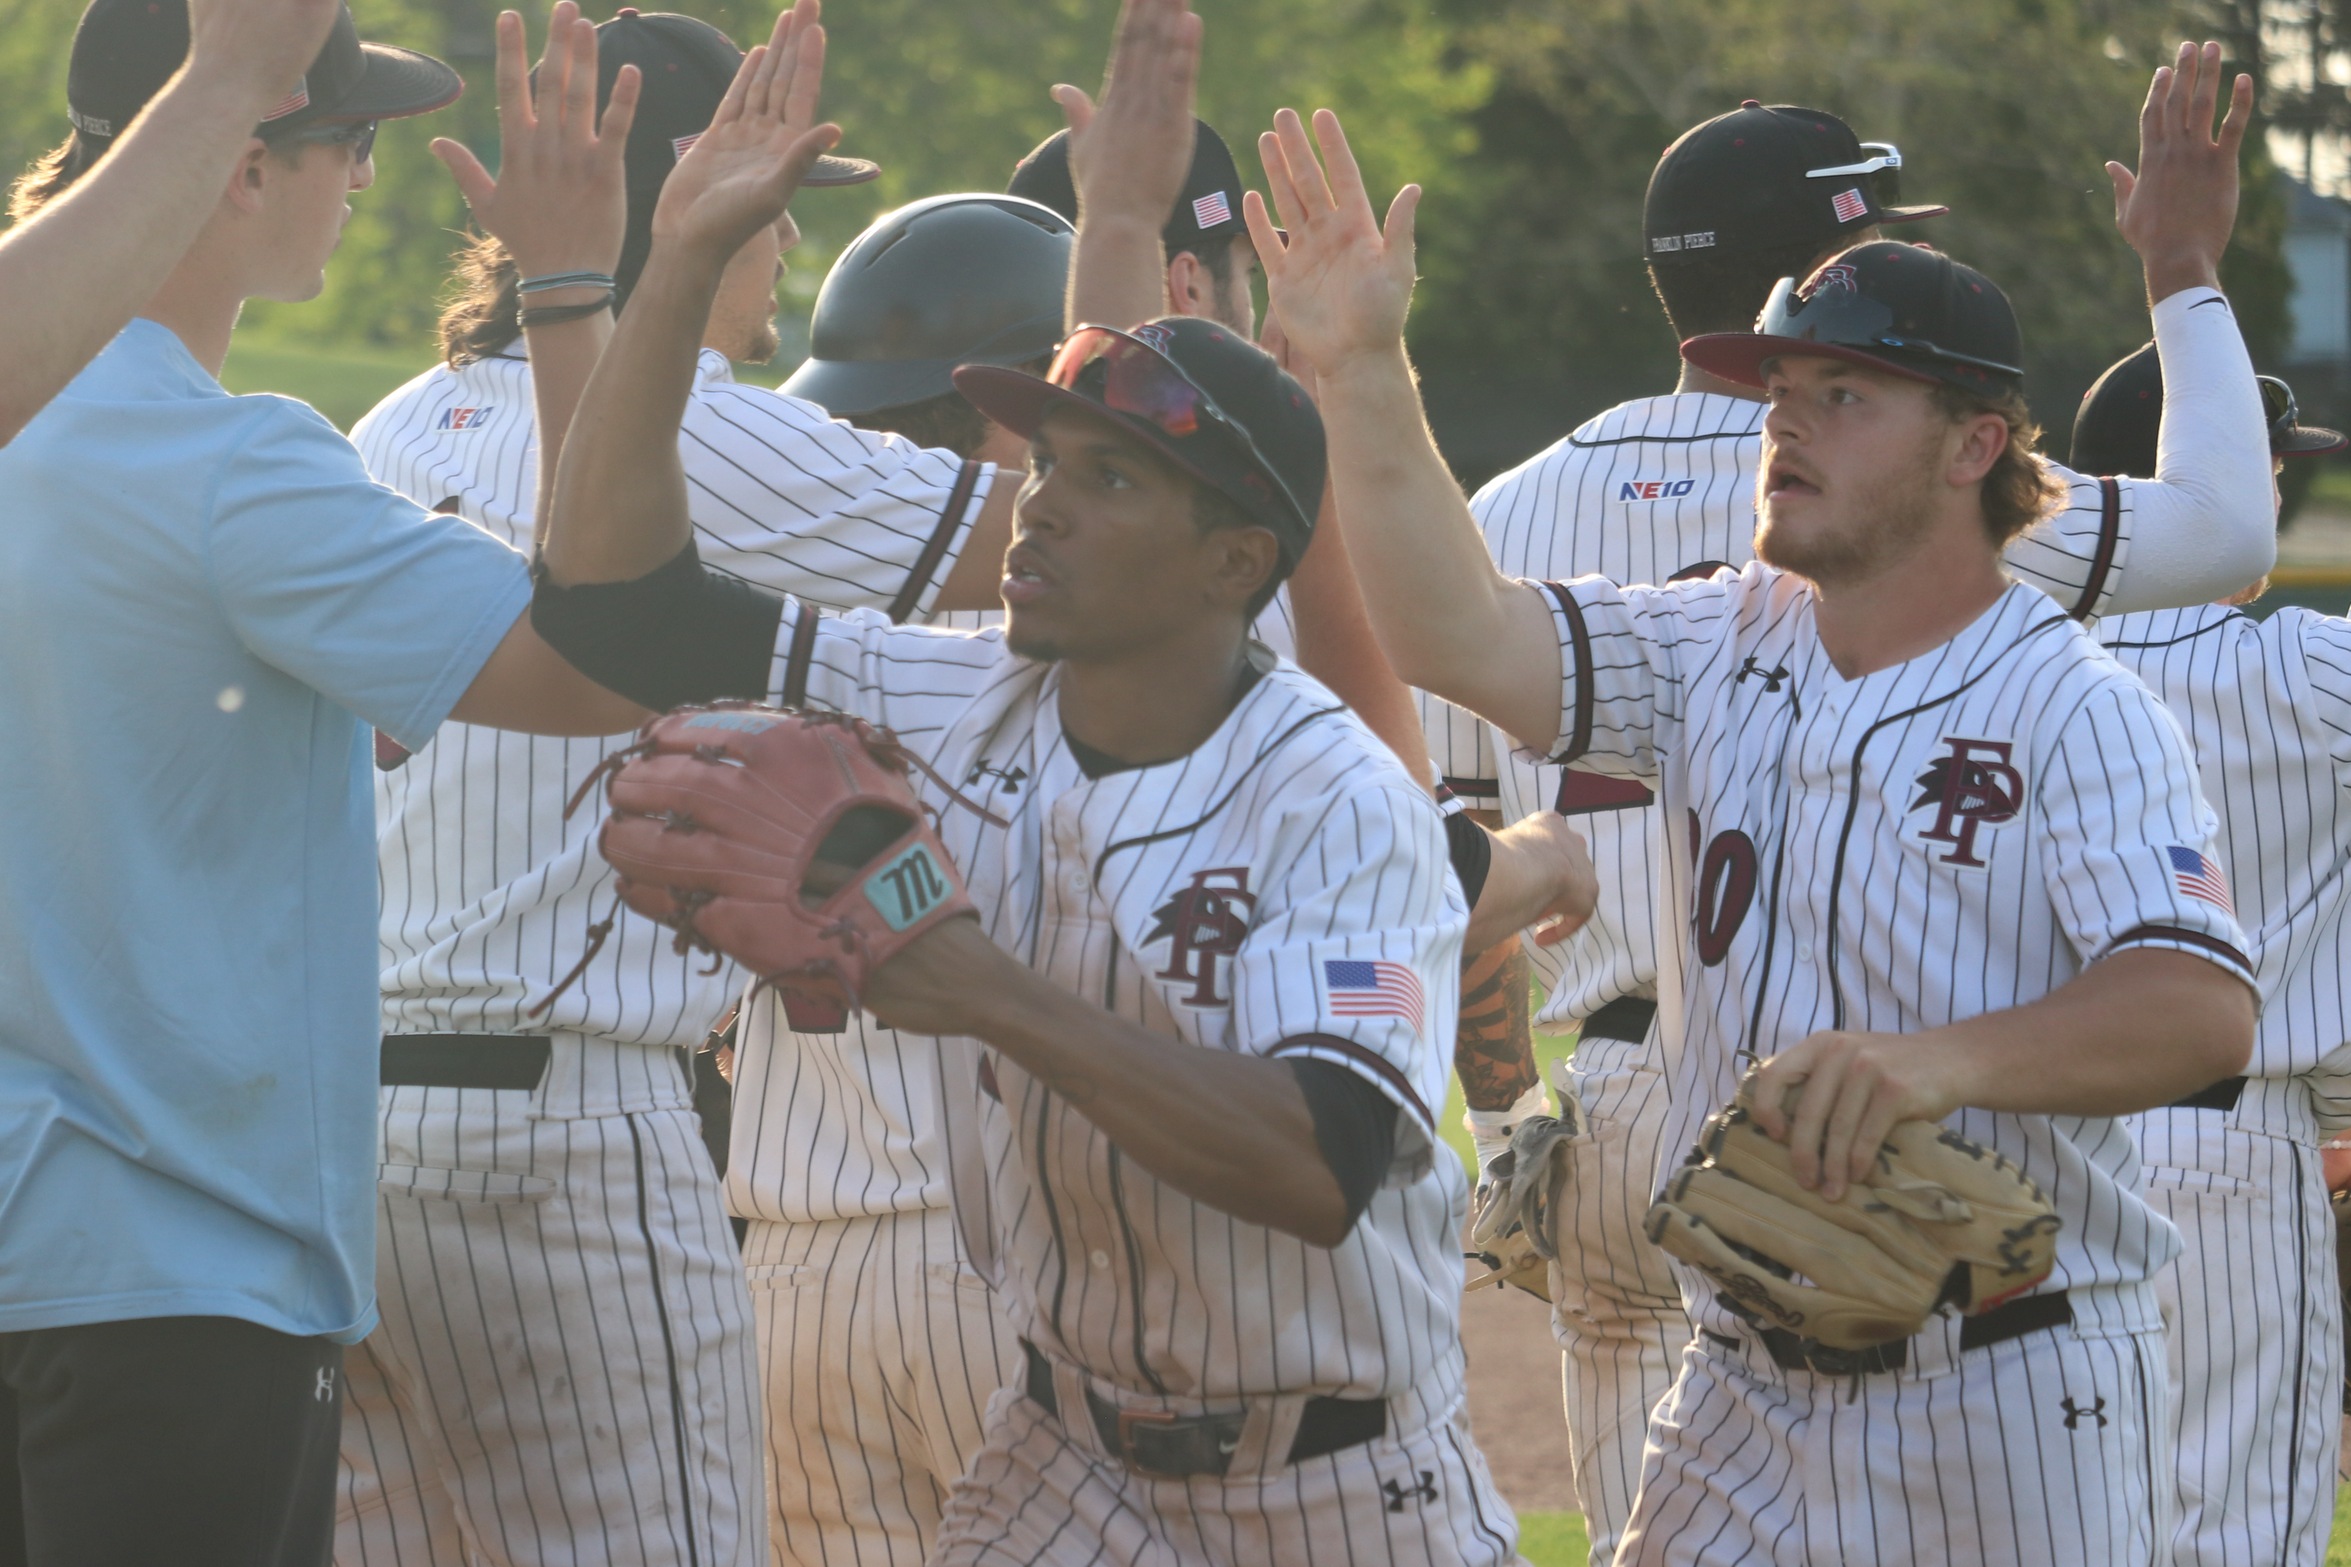 Baseball Moves on to Final Day of NE10 Championship Weekend With Wins Over Bentley & Le Moyne